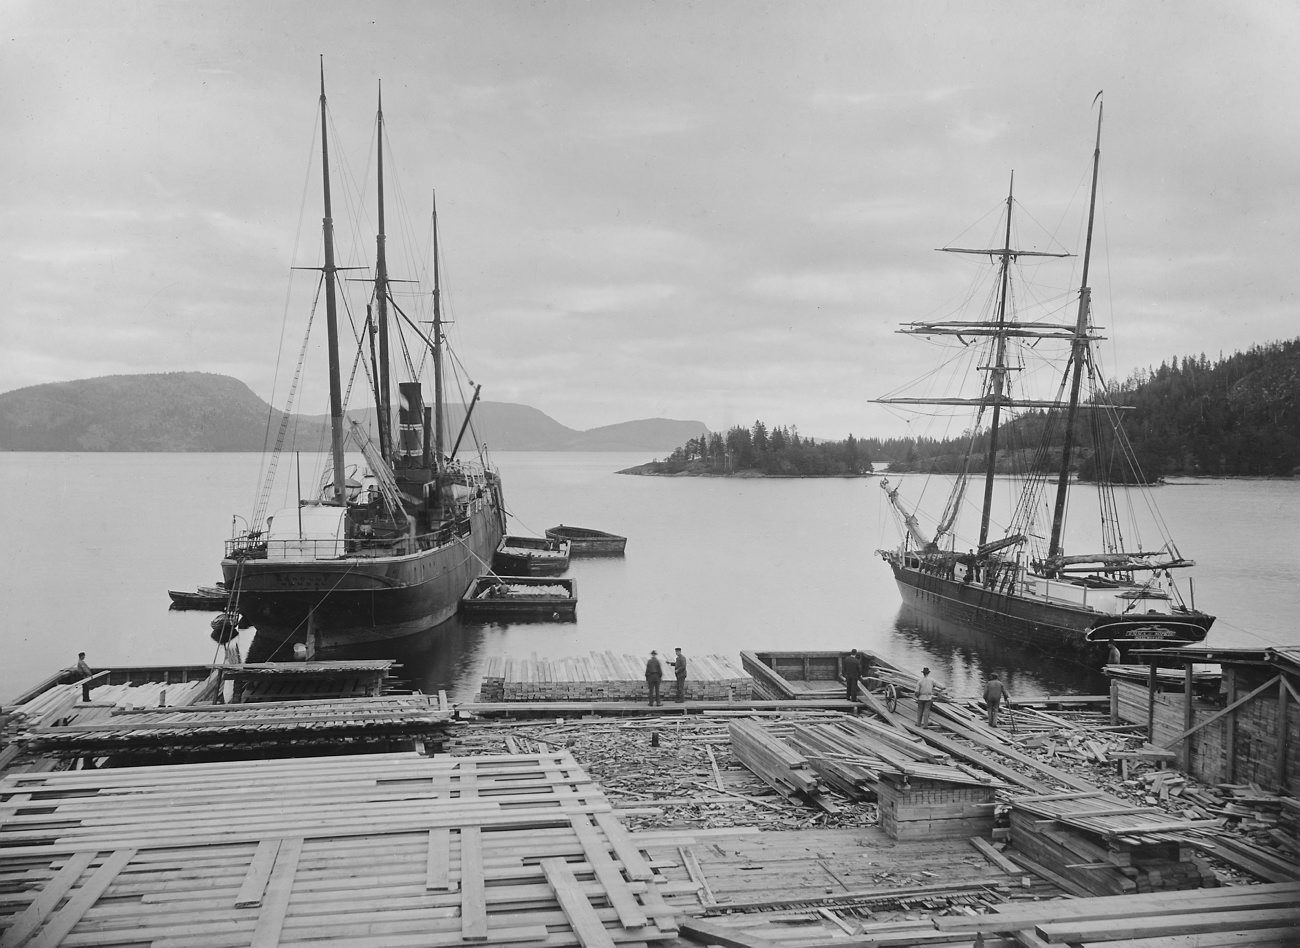 black and white pograph of two boats docked at a pier